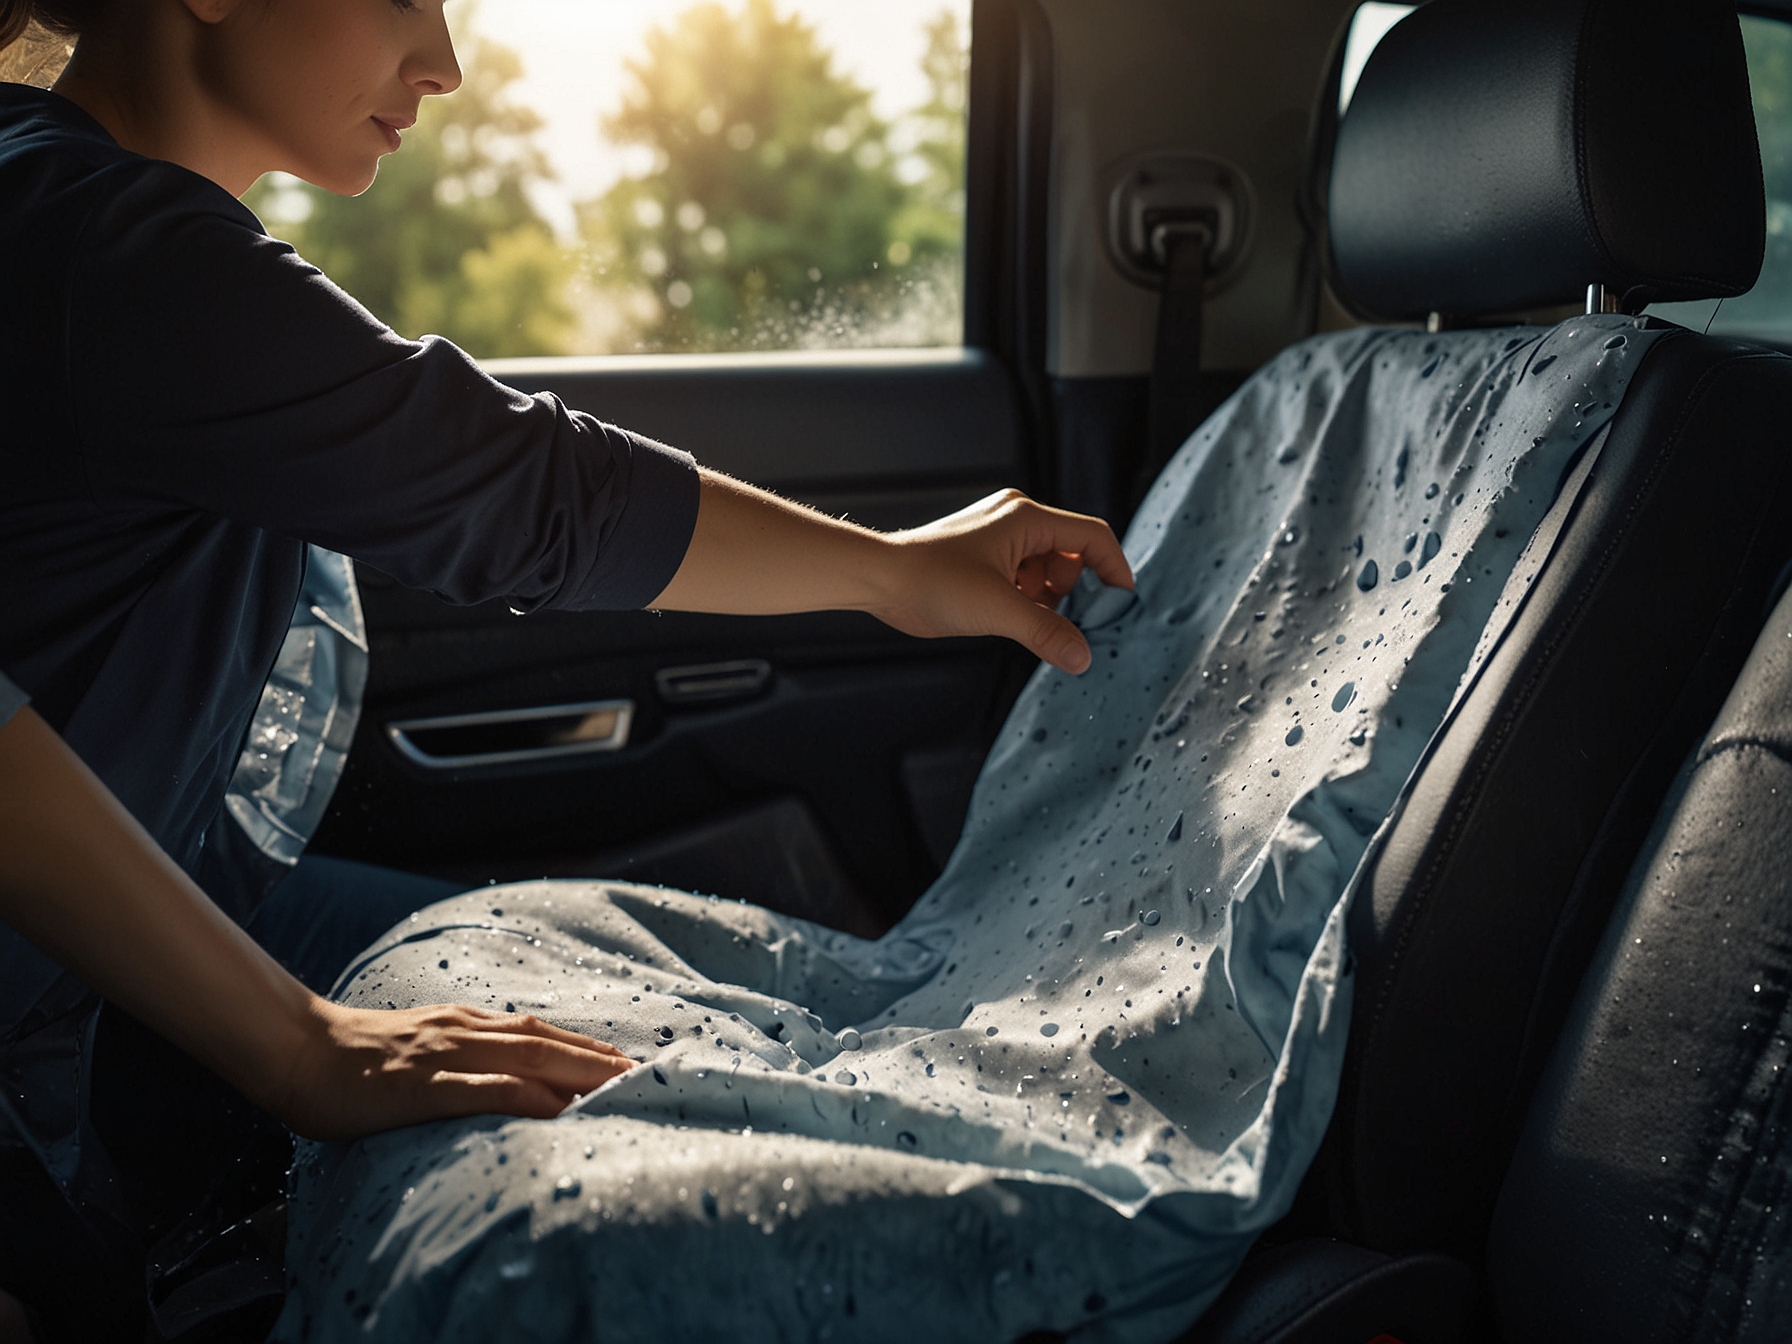 A person placing a damp, water-soaked cloth on a car seat, illustrating a cost-effective method to cool down the seat and improve comfort when entering a parked car under the sun.